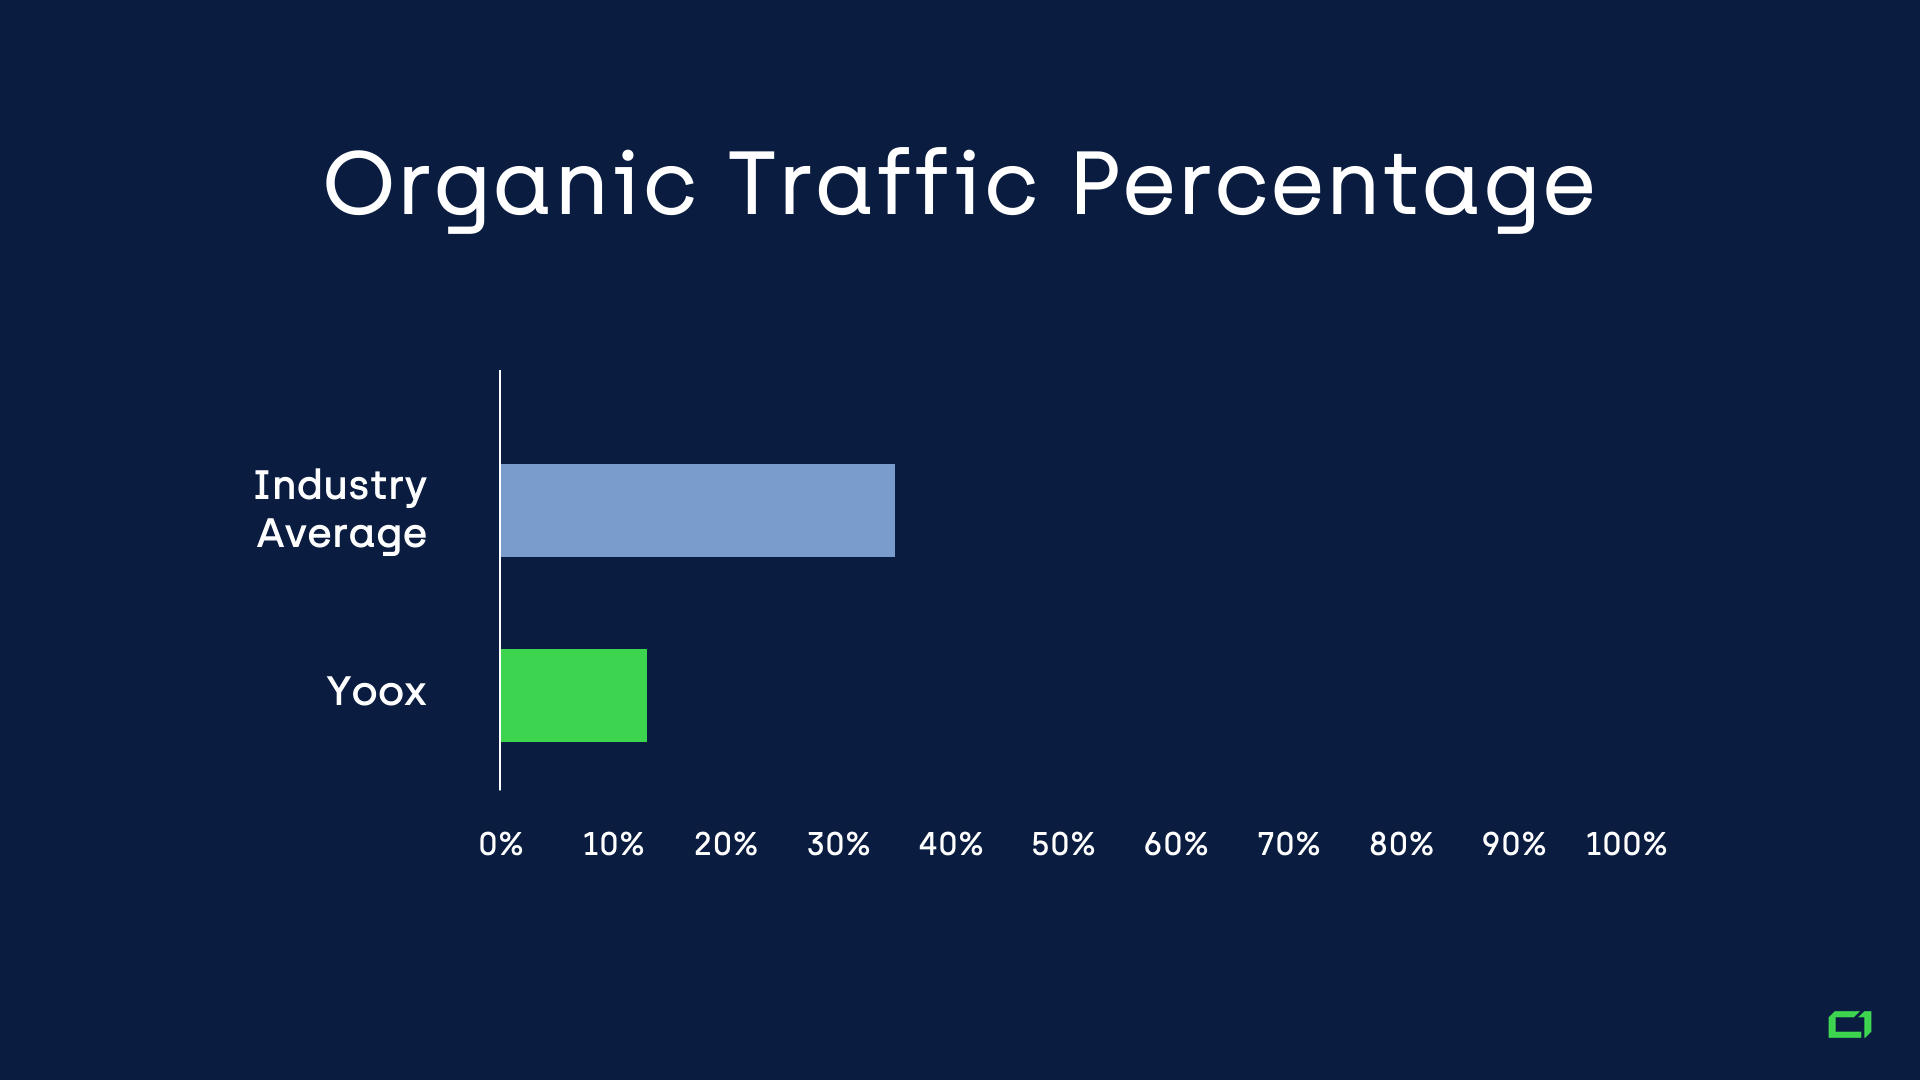 A bar chart showing the organic traffic percentage of Yoox compared to the industry average